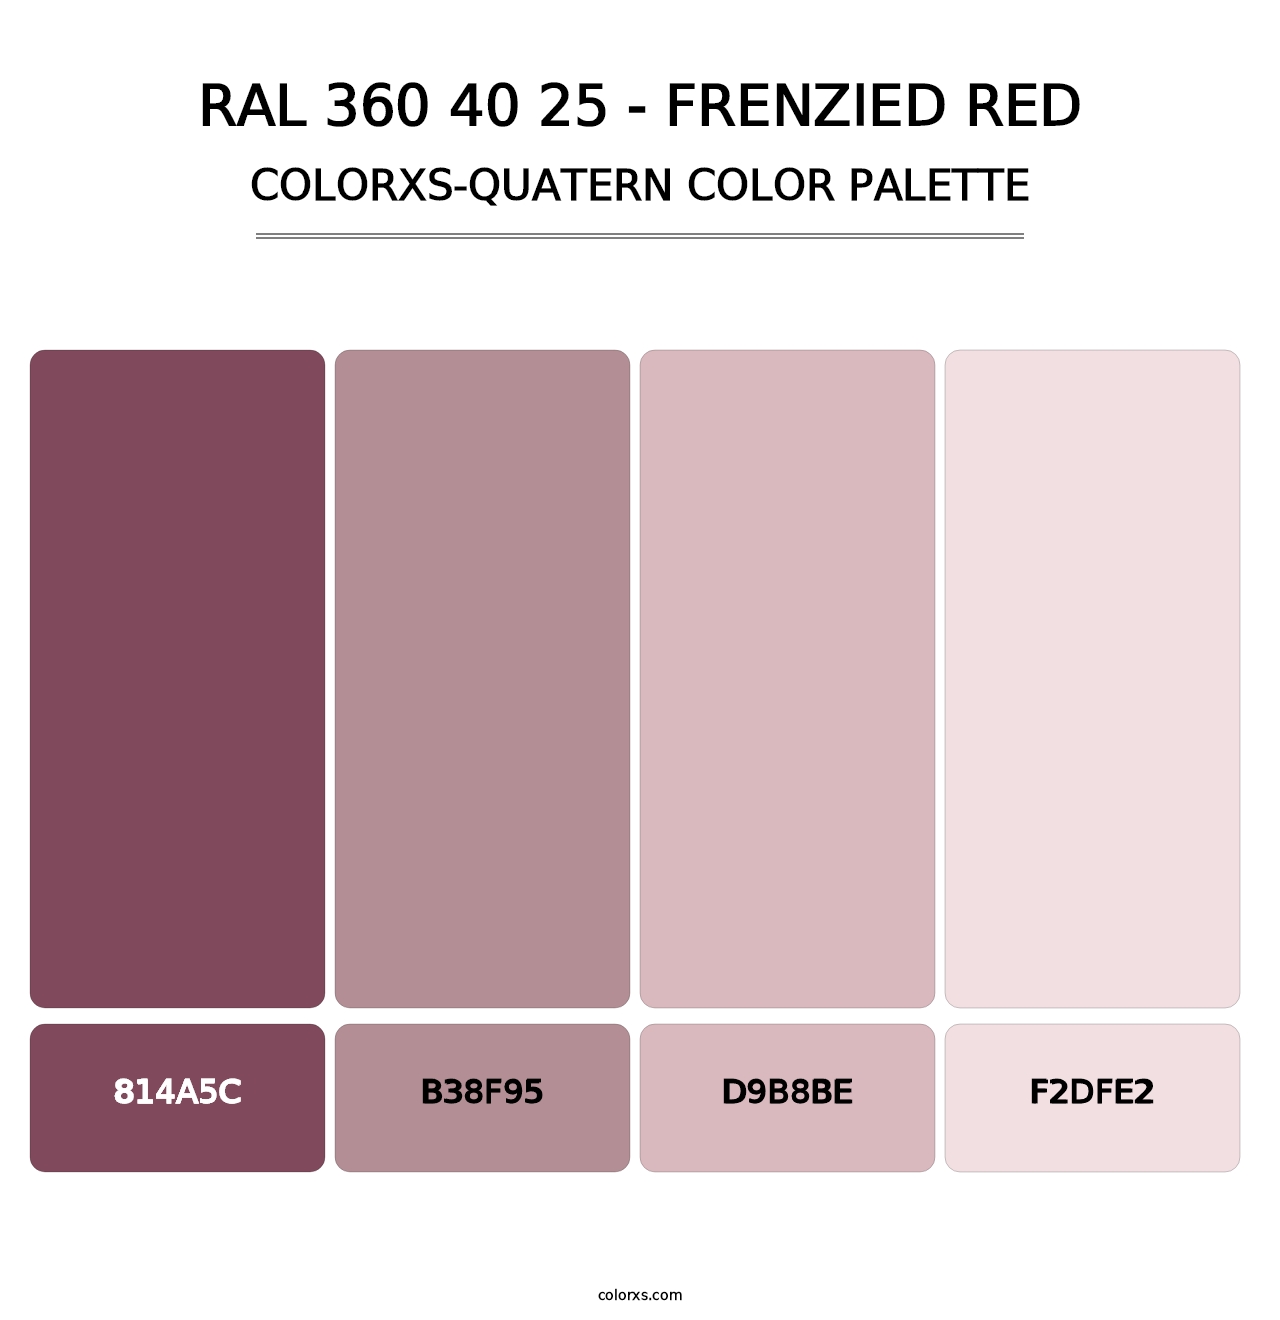 RAL 360 40 25 - Frenzied Red - Colorxs Quatern Palette